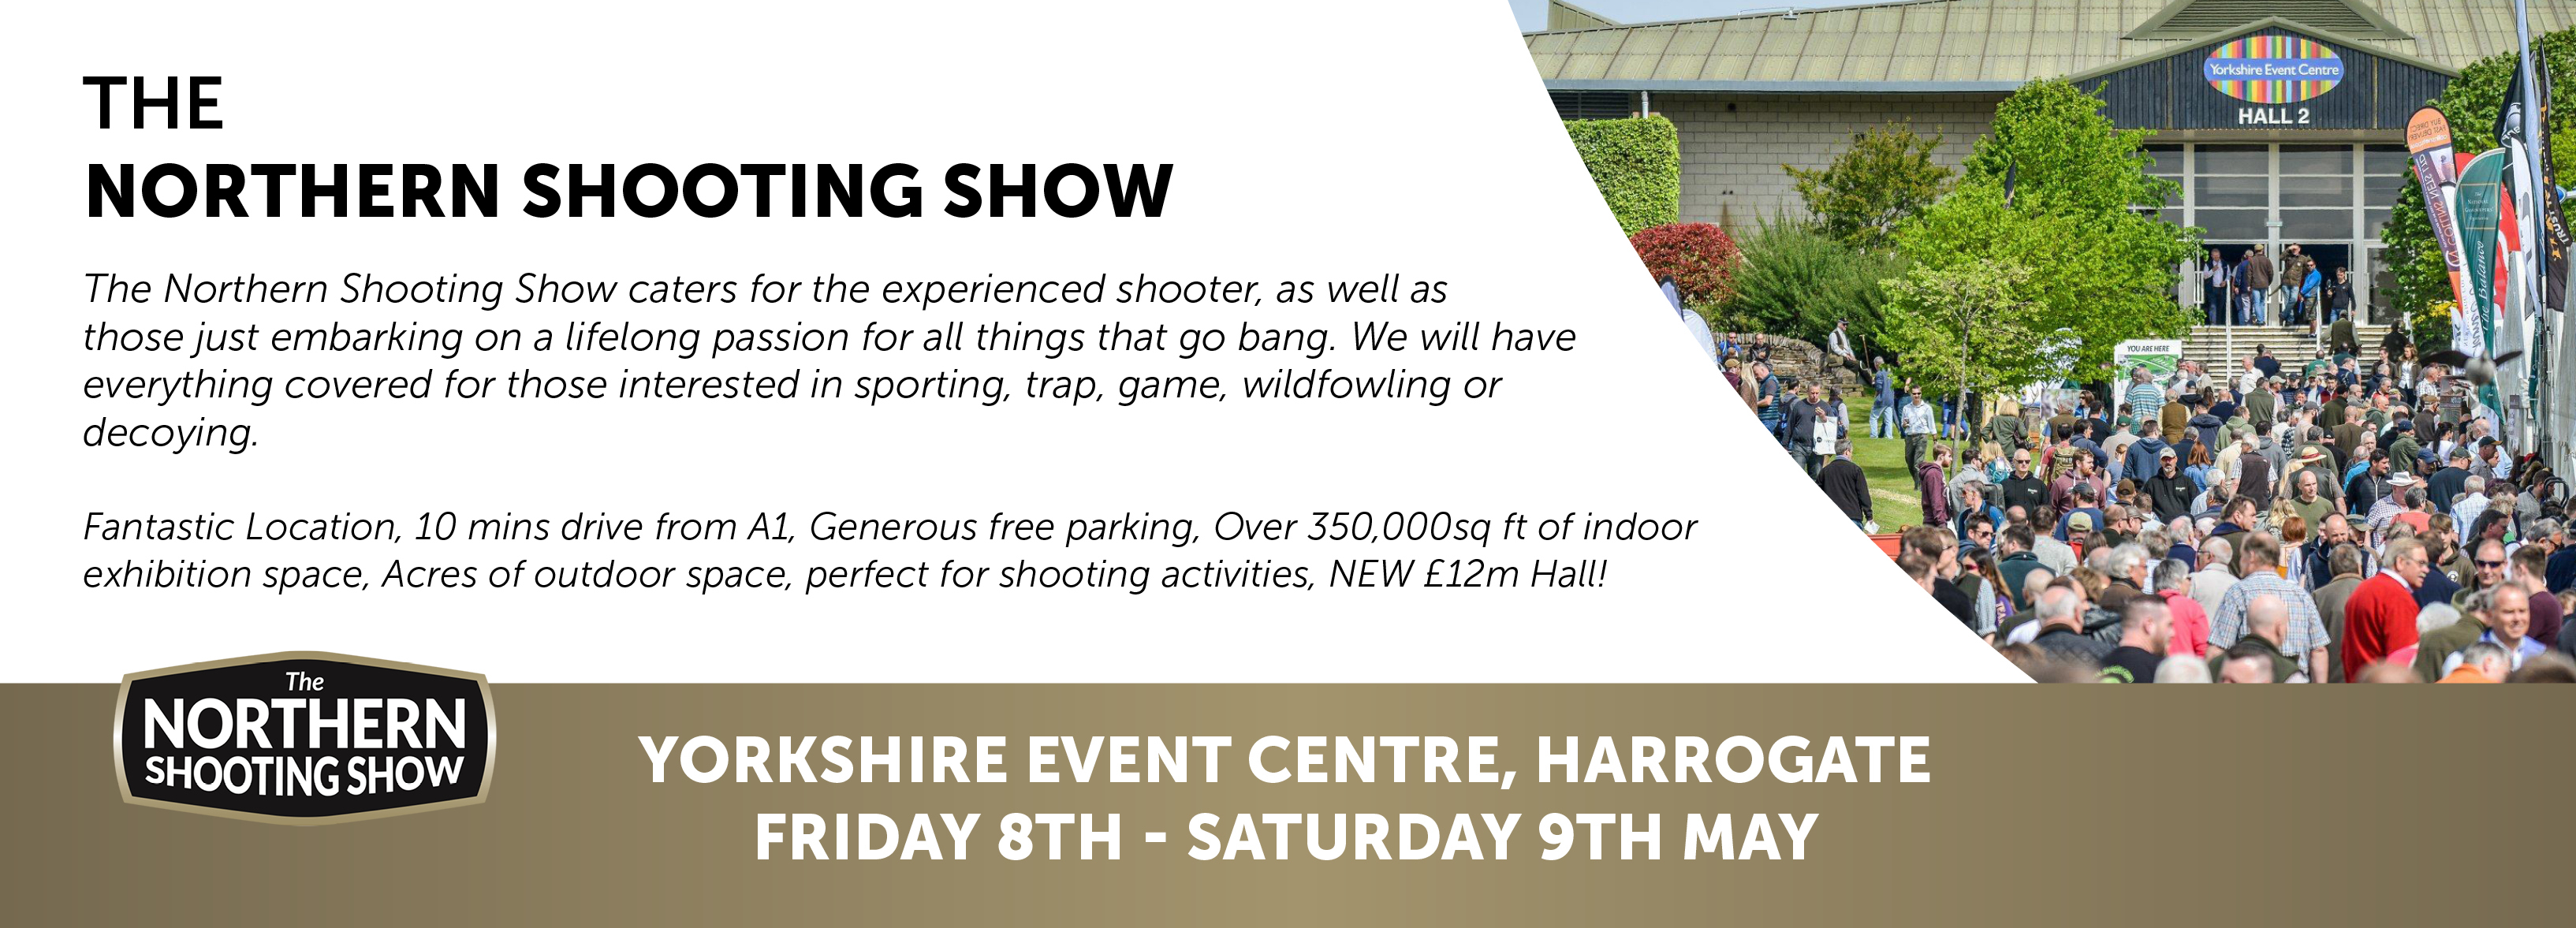 The Northern Shooting Show 2020